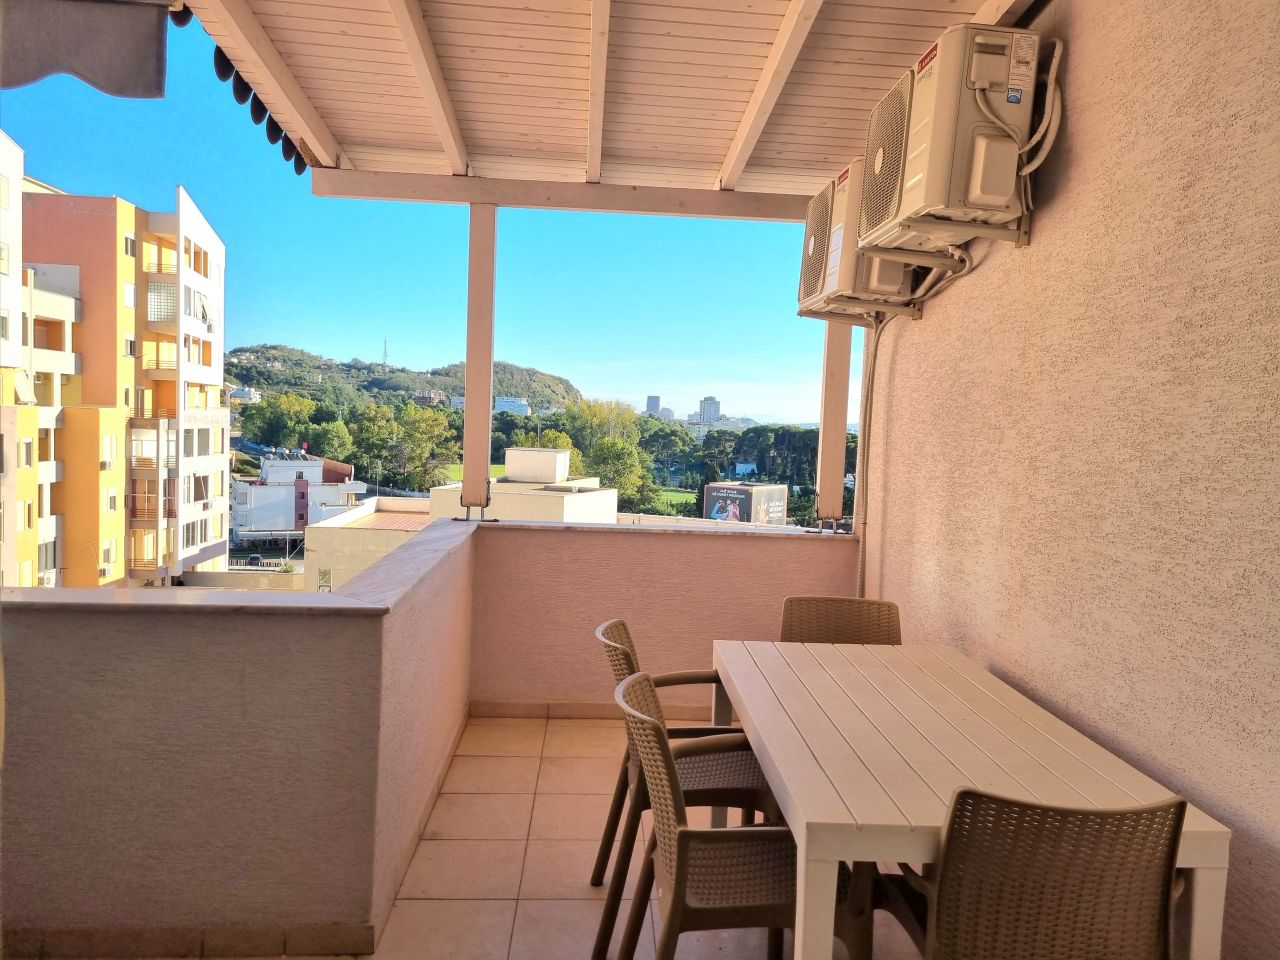 Sea View Property In Durres For Sale With A Full Furniture Package Included And A Really Nice Sea View From The Balconies